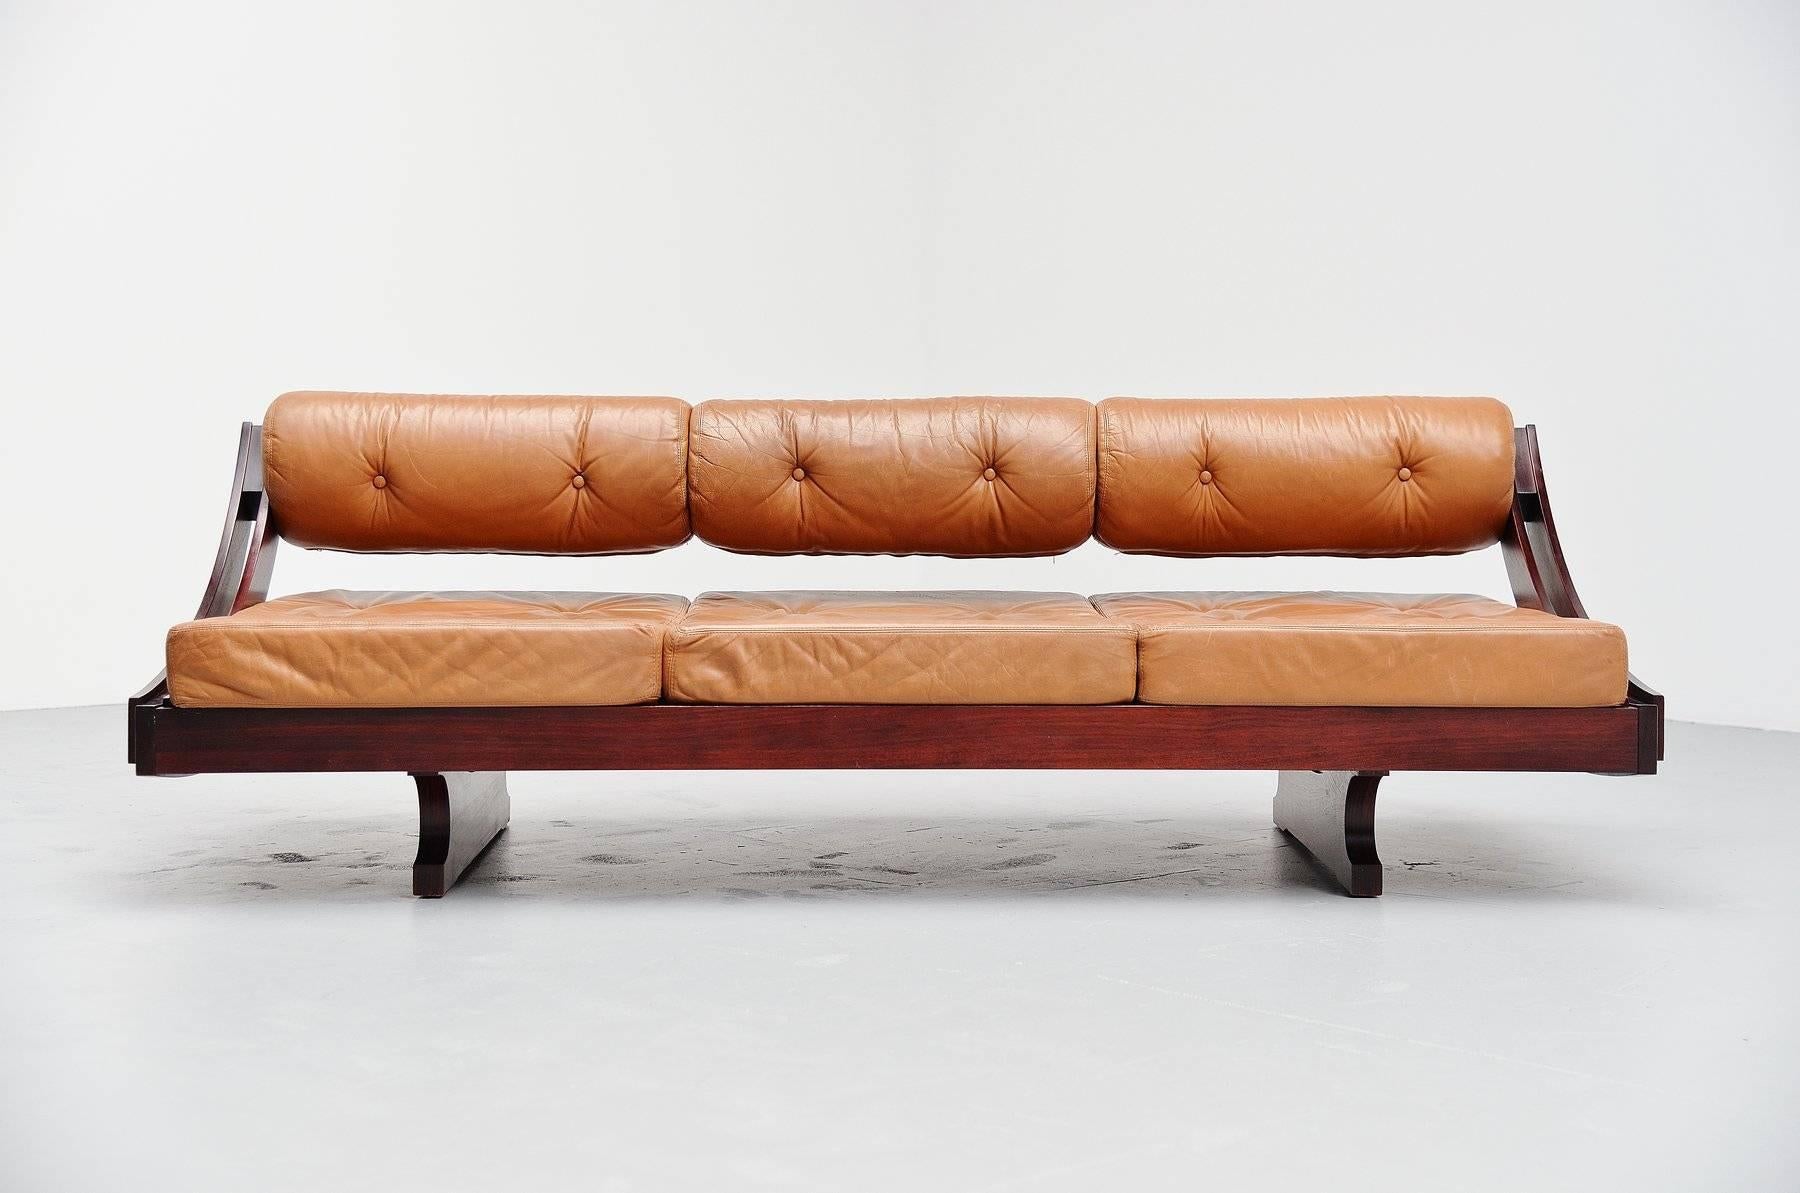 Beautiful lounge sofa/daybed model GS195 designed by Gianni Songia for Sormani, Italy, 1963. This sofa has a sculptural rosewood sliding frame and very nice cognac leather cushions and seating. The sofa is in very good original condition preserving